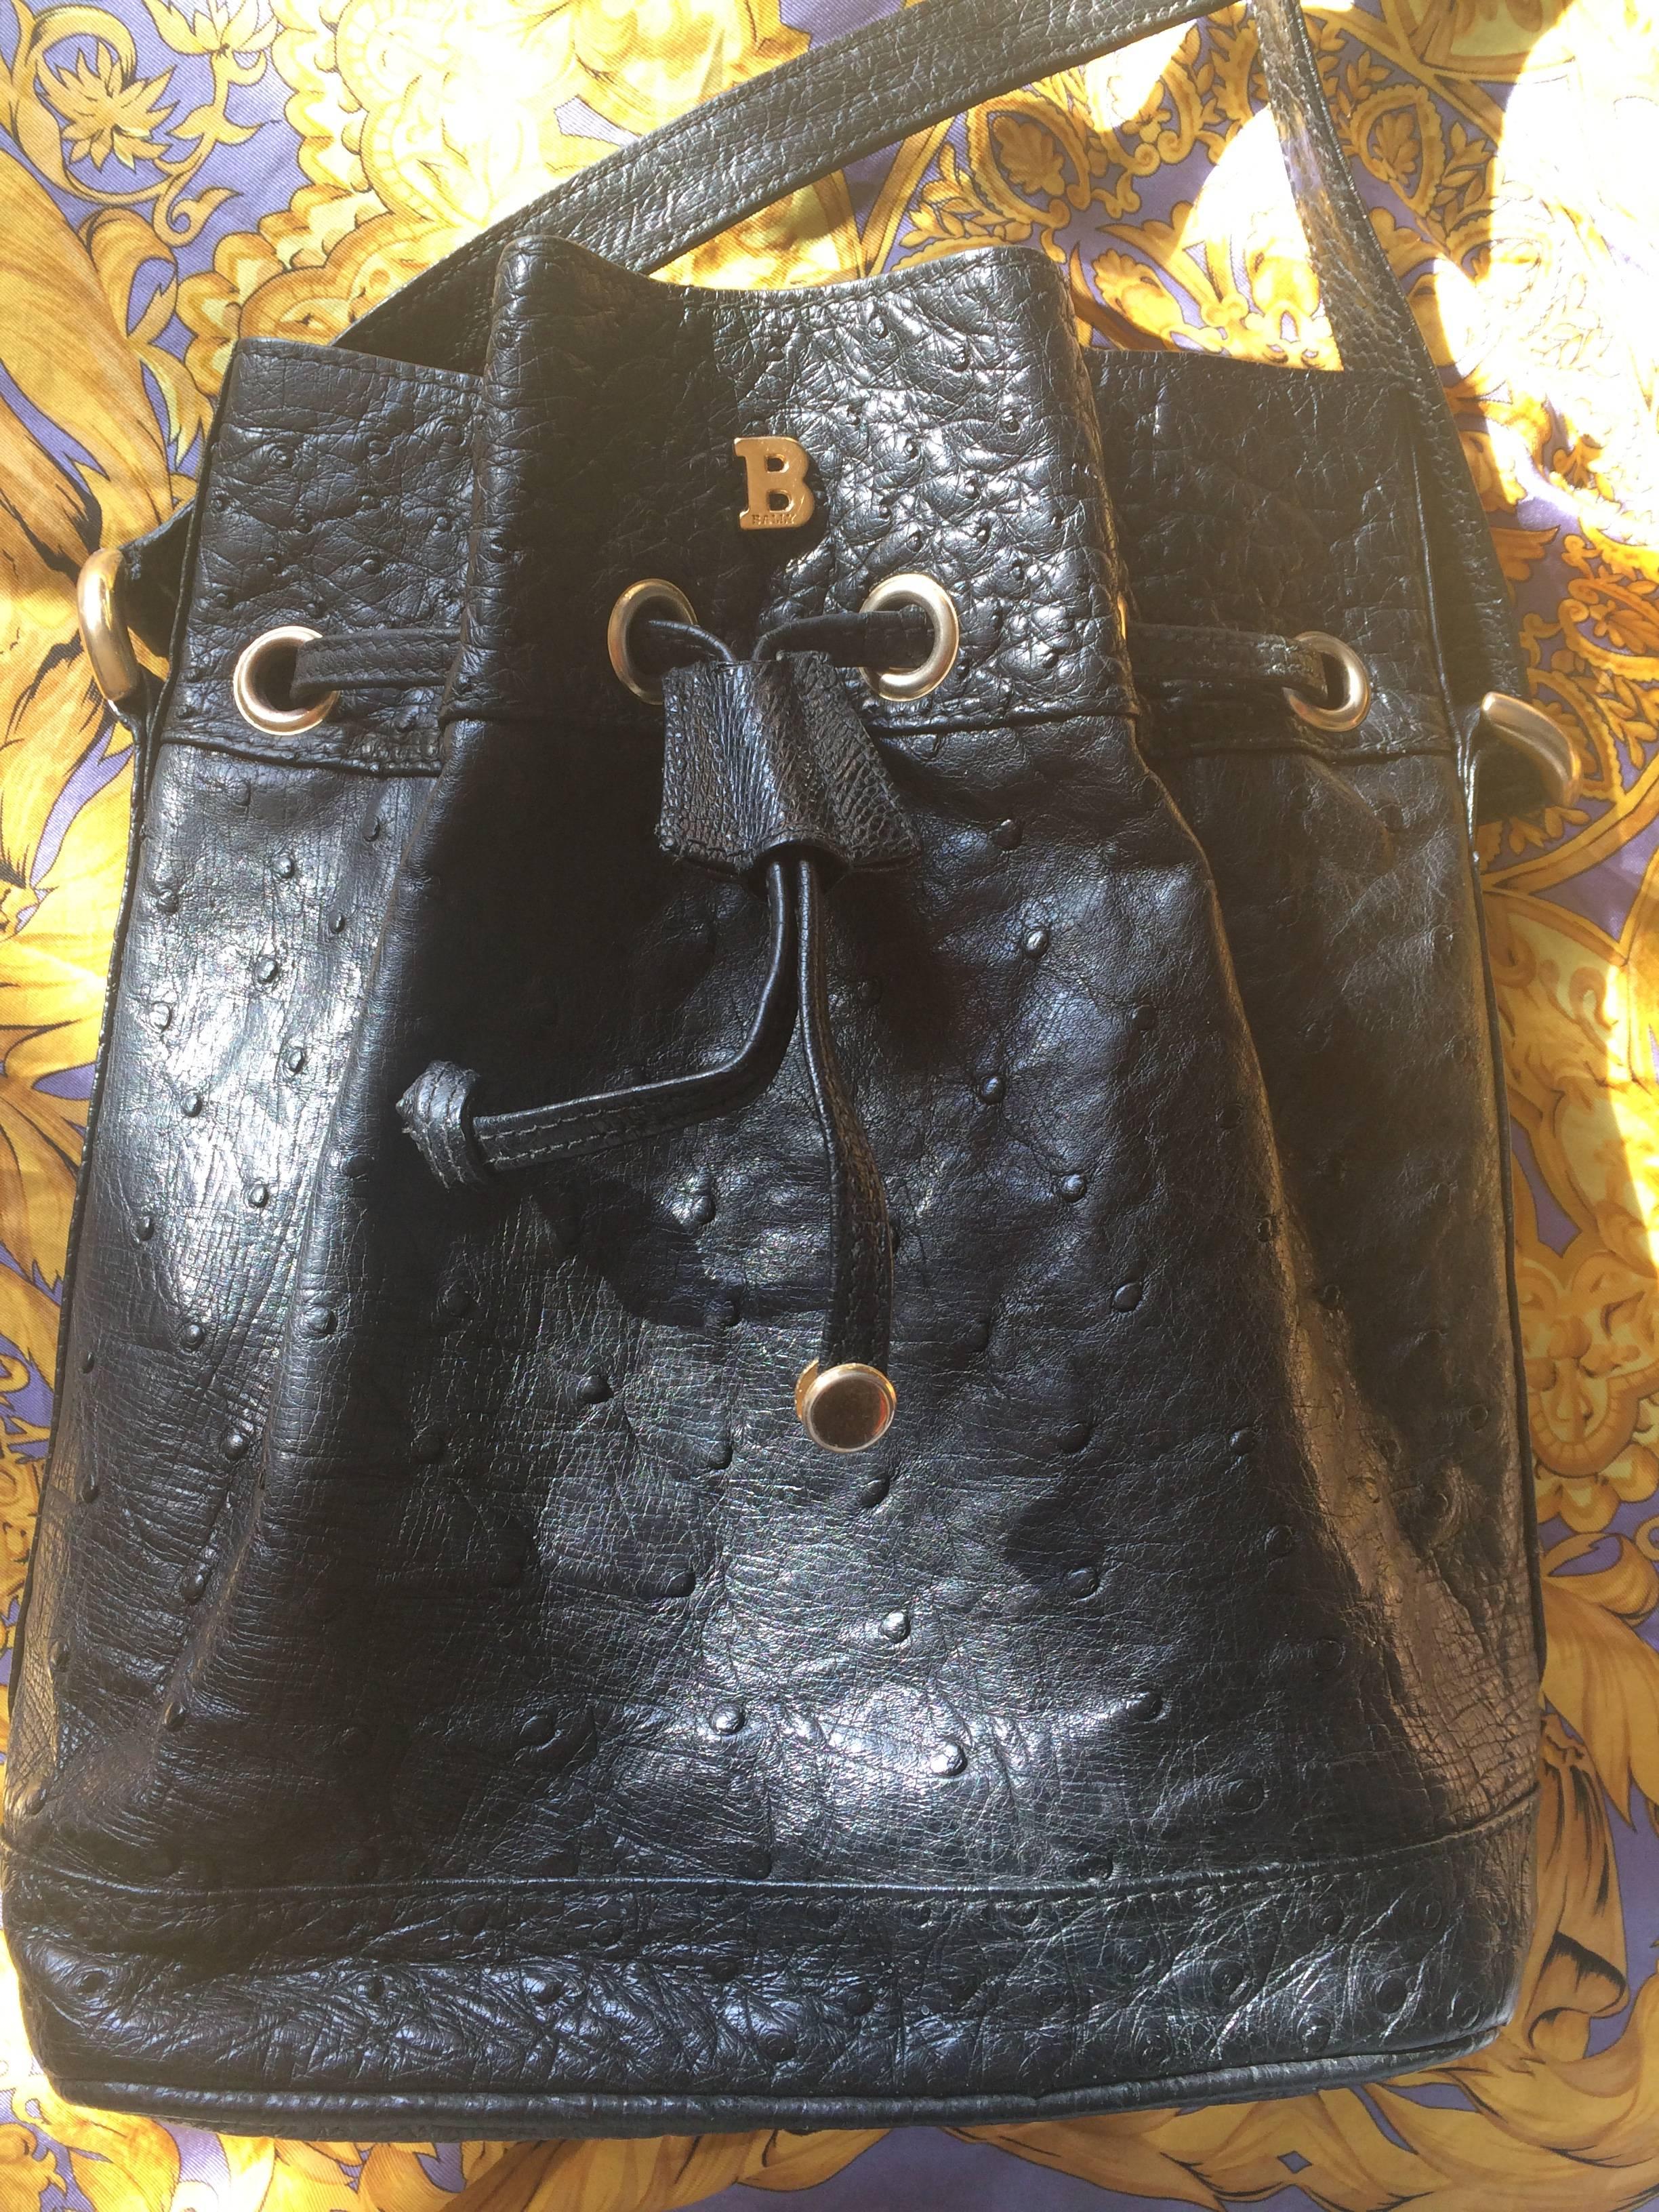 1980's vintage BALLY genuine black ostrich leather hobo bucket shoulder bag with golden B logo and drawstrings.

This is a vintage Bally genuine ostrich leather shoulder bag made out of genuine ostrich leather from the 80s.
This classic purse